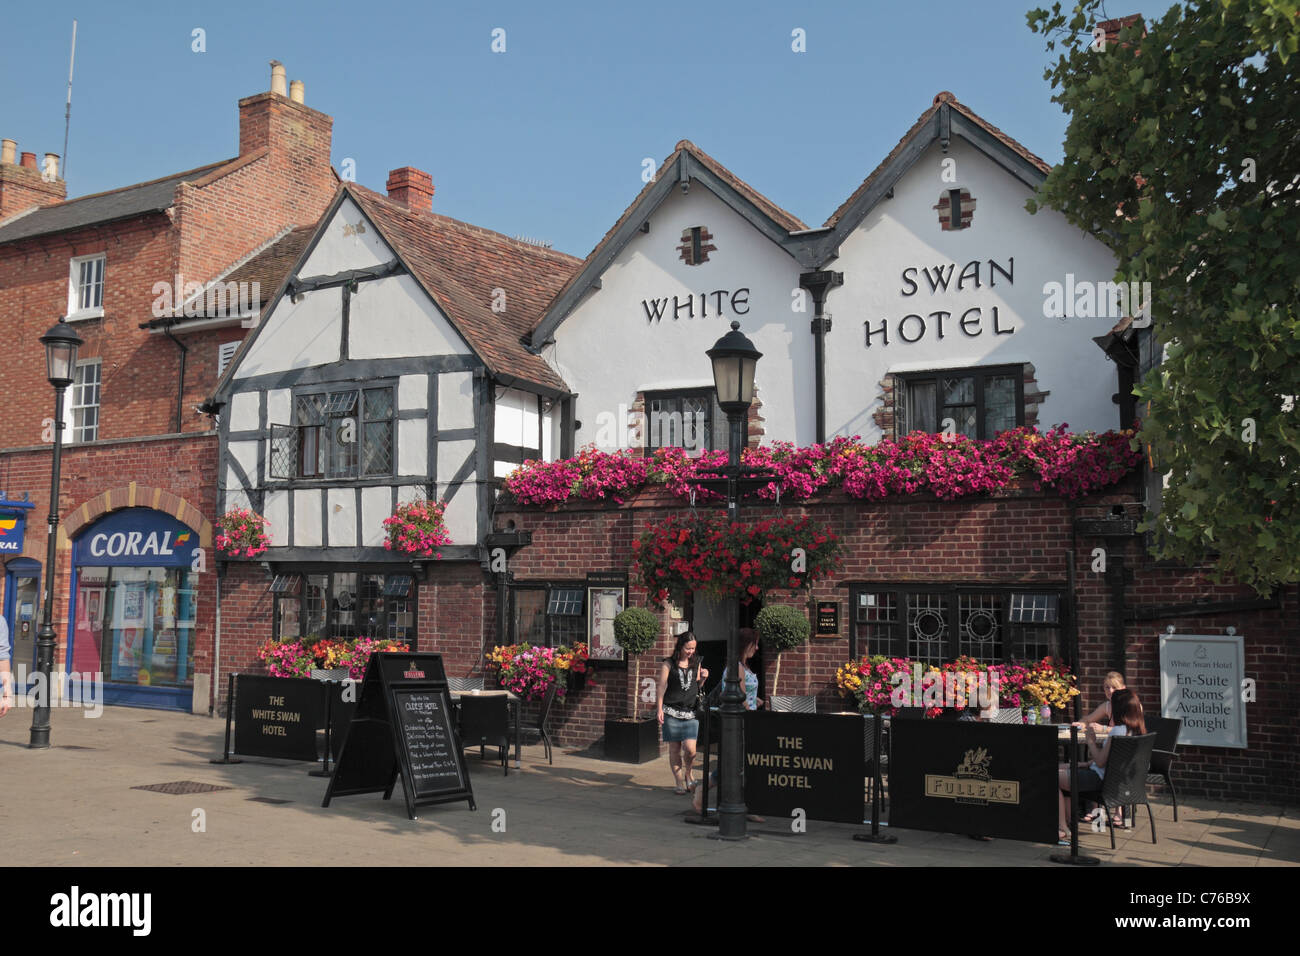 The White Swan Hotel on Rother Street in Stratford Upon Avon, Warwickshire, UK. Stock Photo